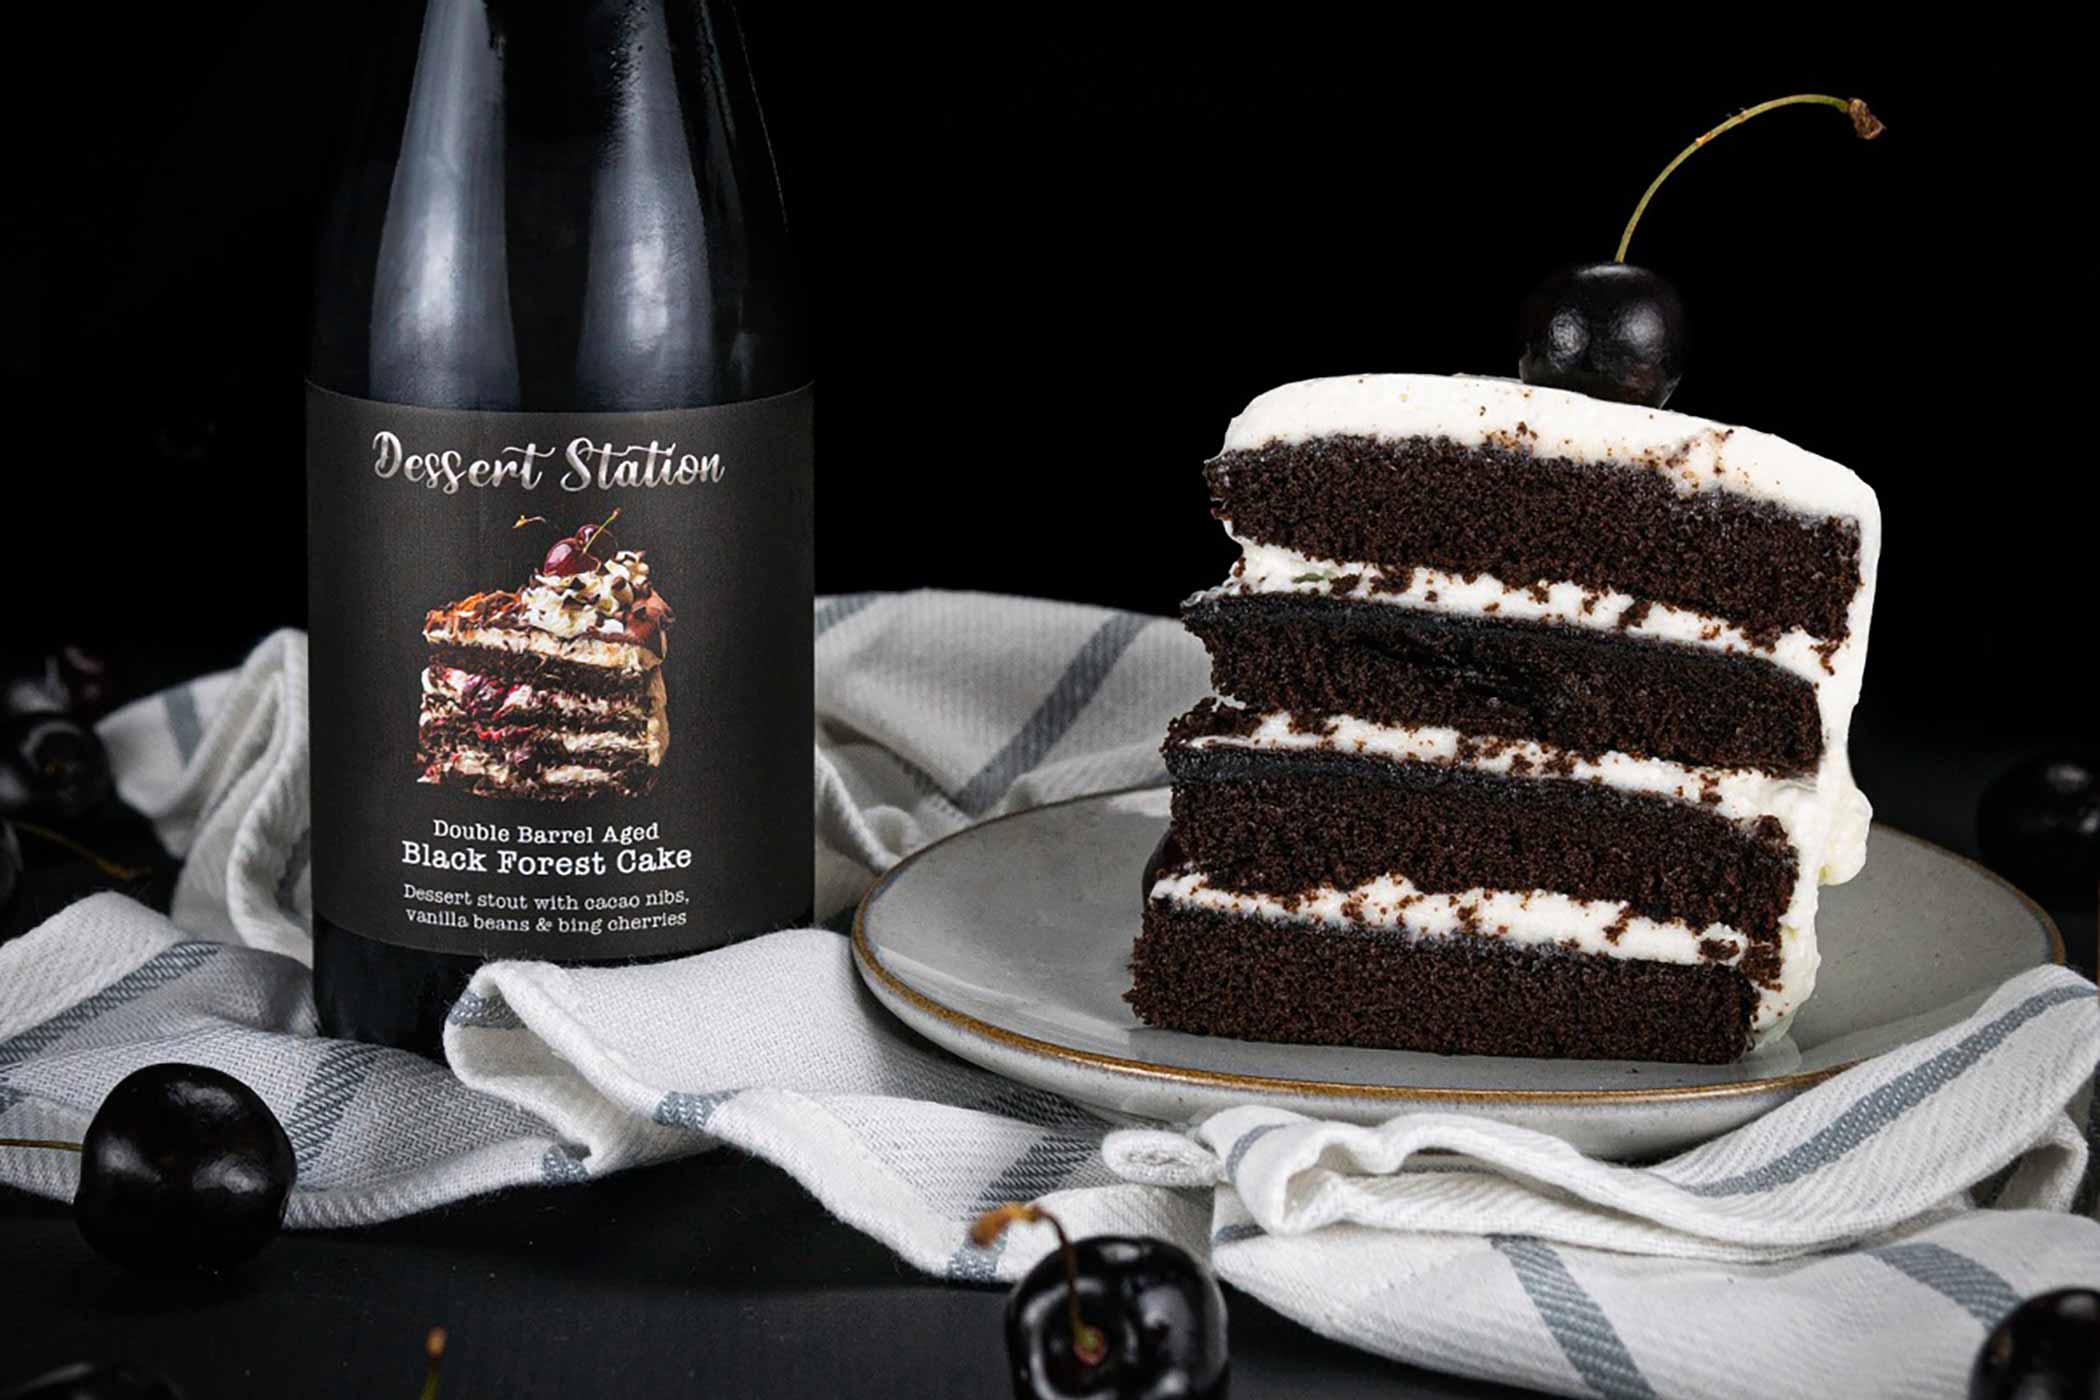 What Exactly Is a Pastry Stout?